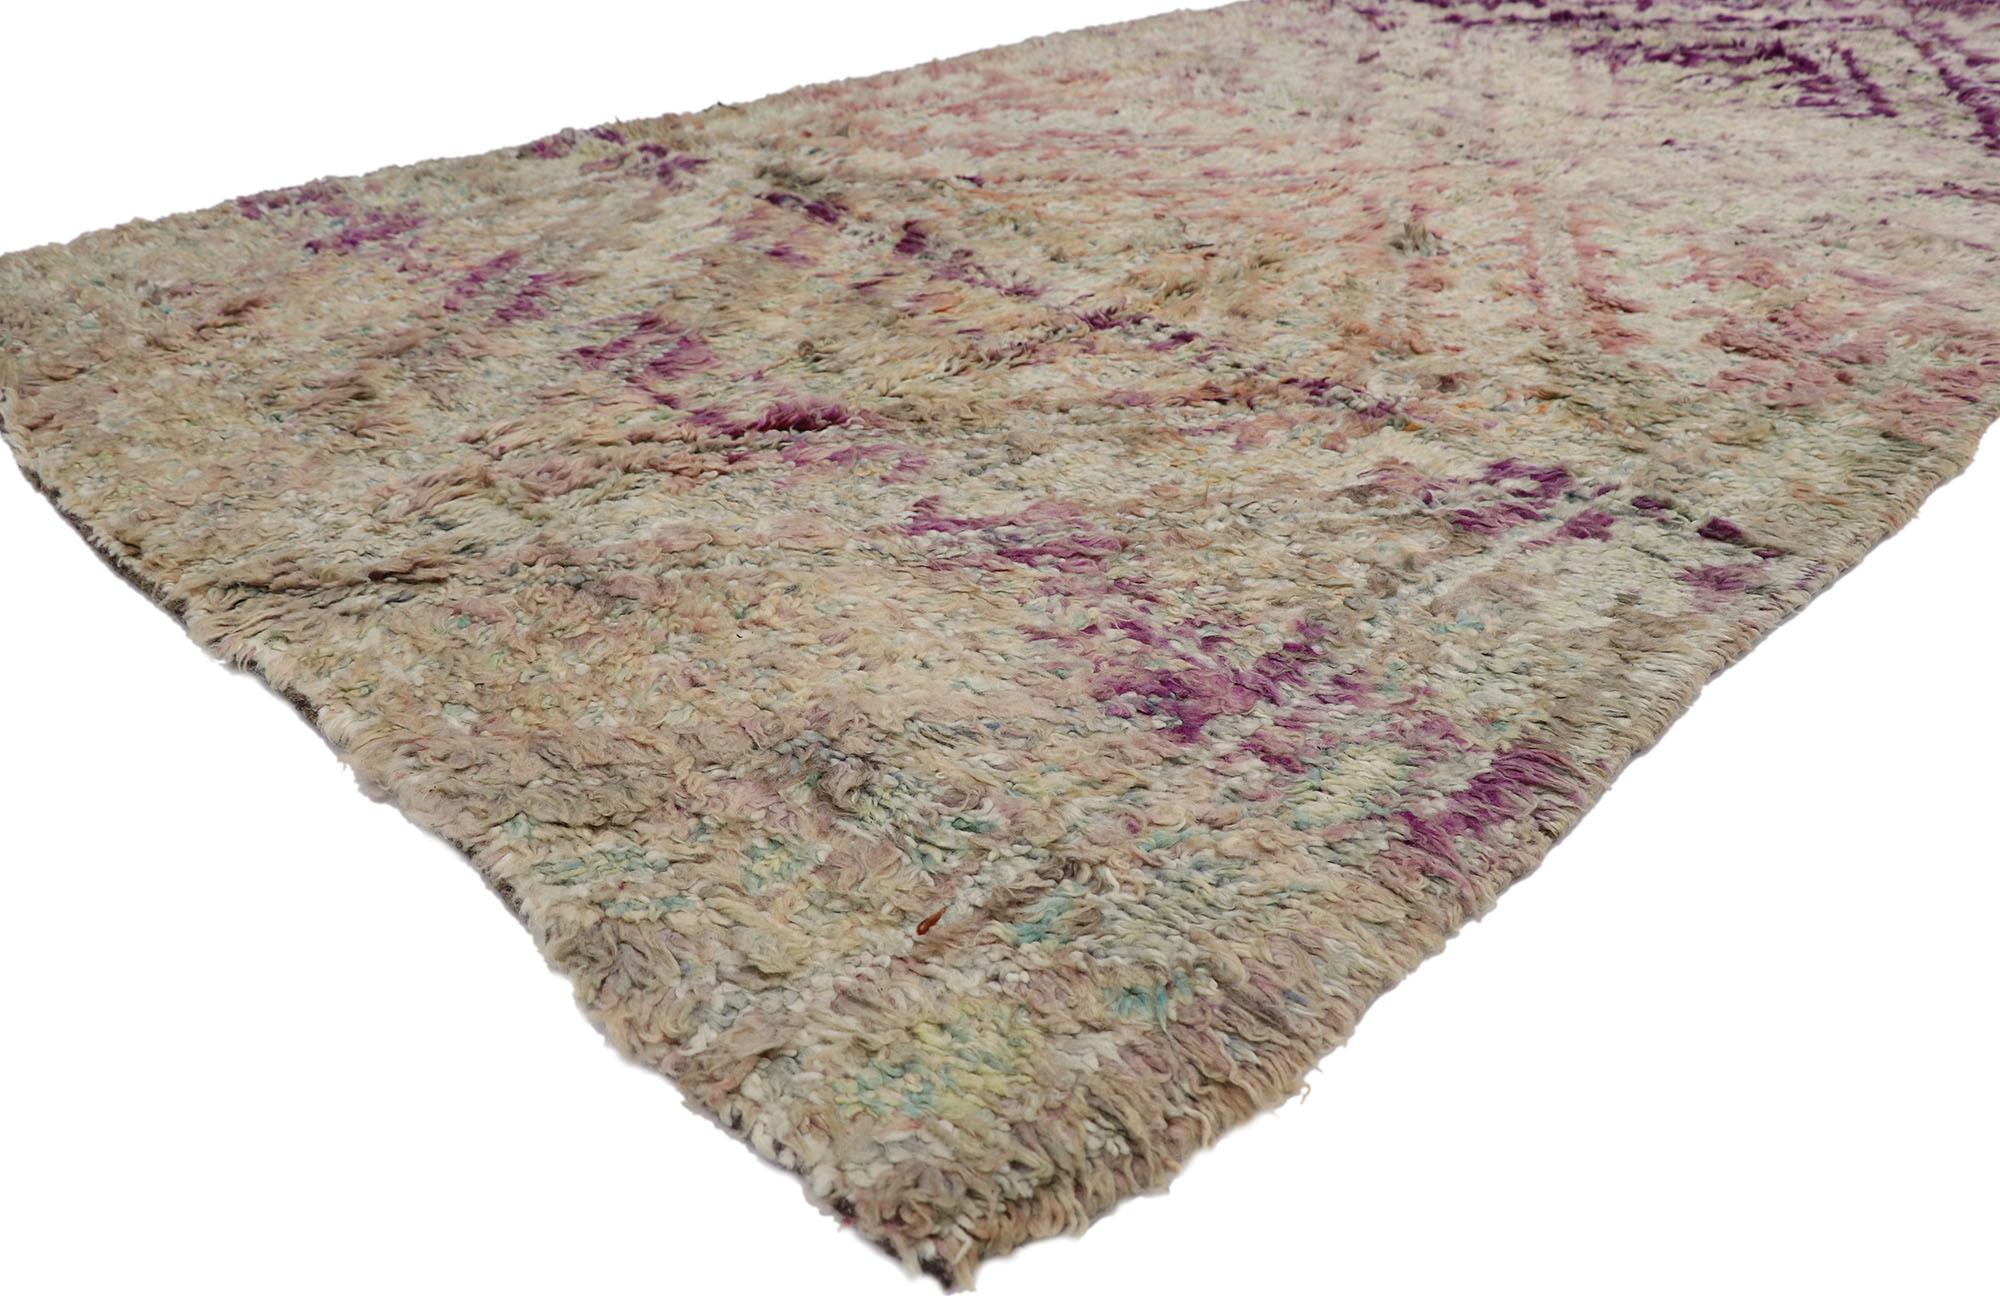 21296 Vintage Berber Purple Moroccan rug with Bohemian Style 05'01 X 10'05. Showcasing an expressive design, incredible detail and texture, this hand knotted wool vintage Berber Moroccan rug is a captivating vision of woven beauty. The eye-catching